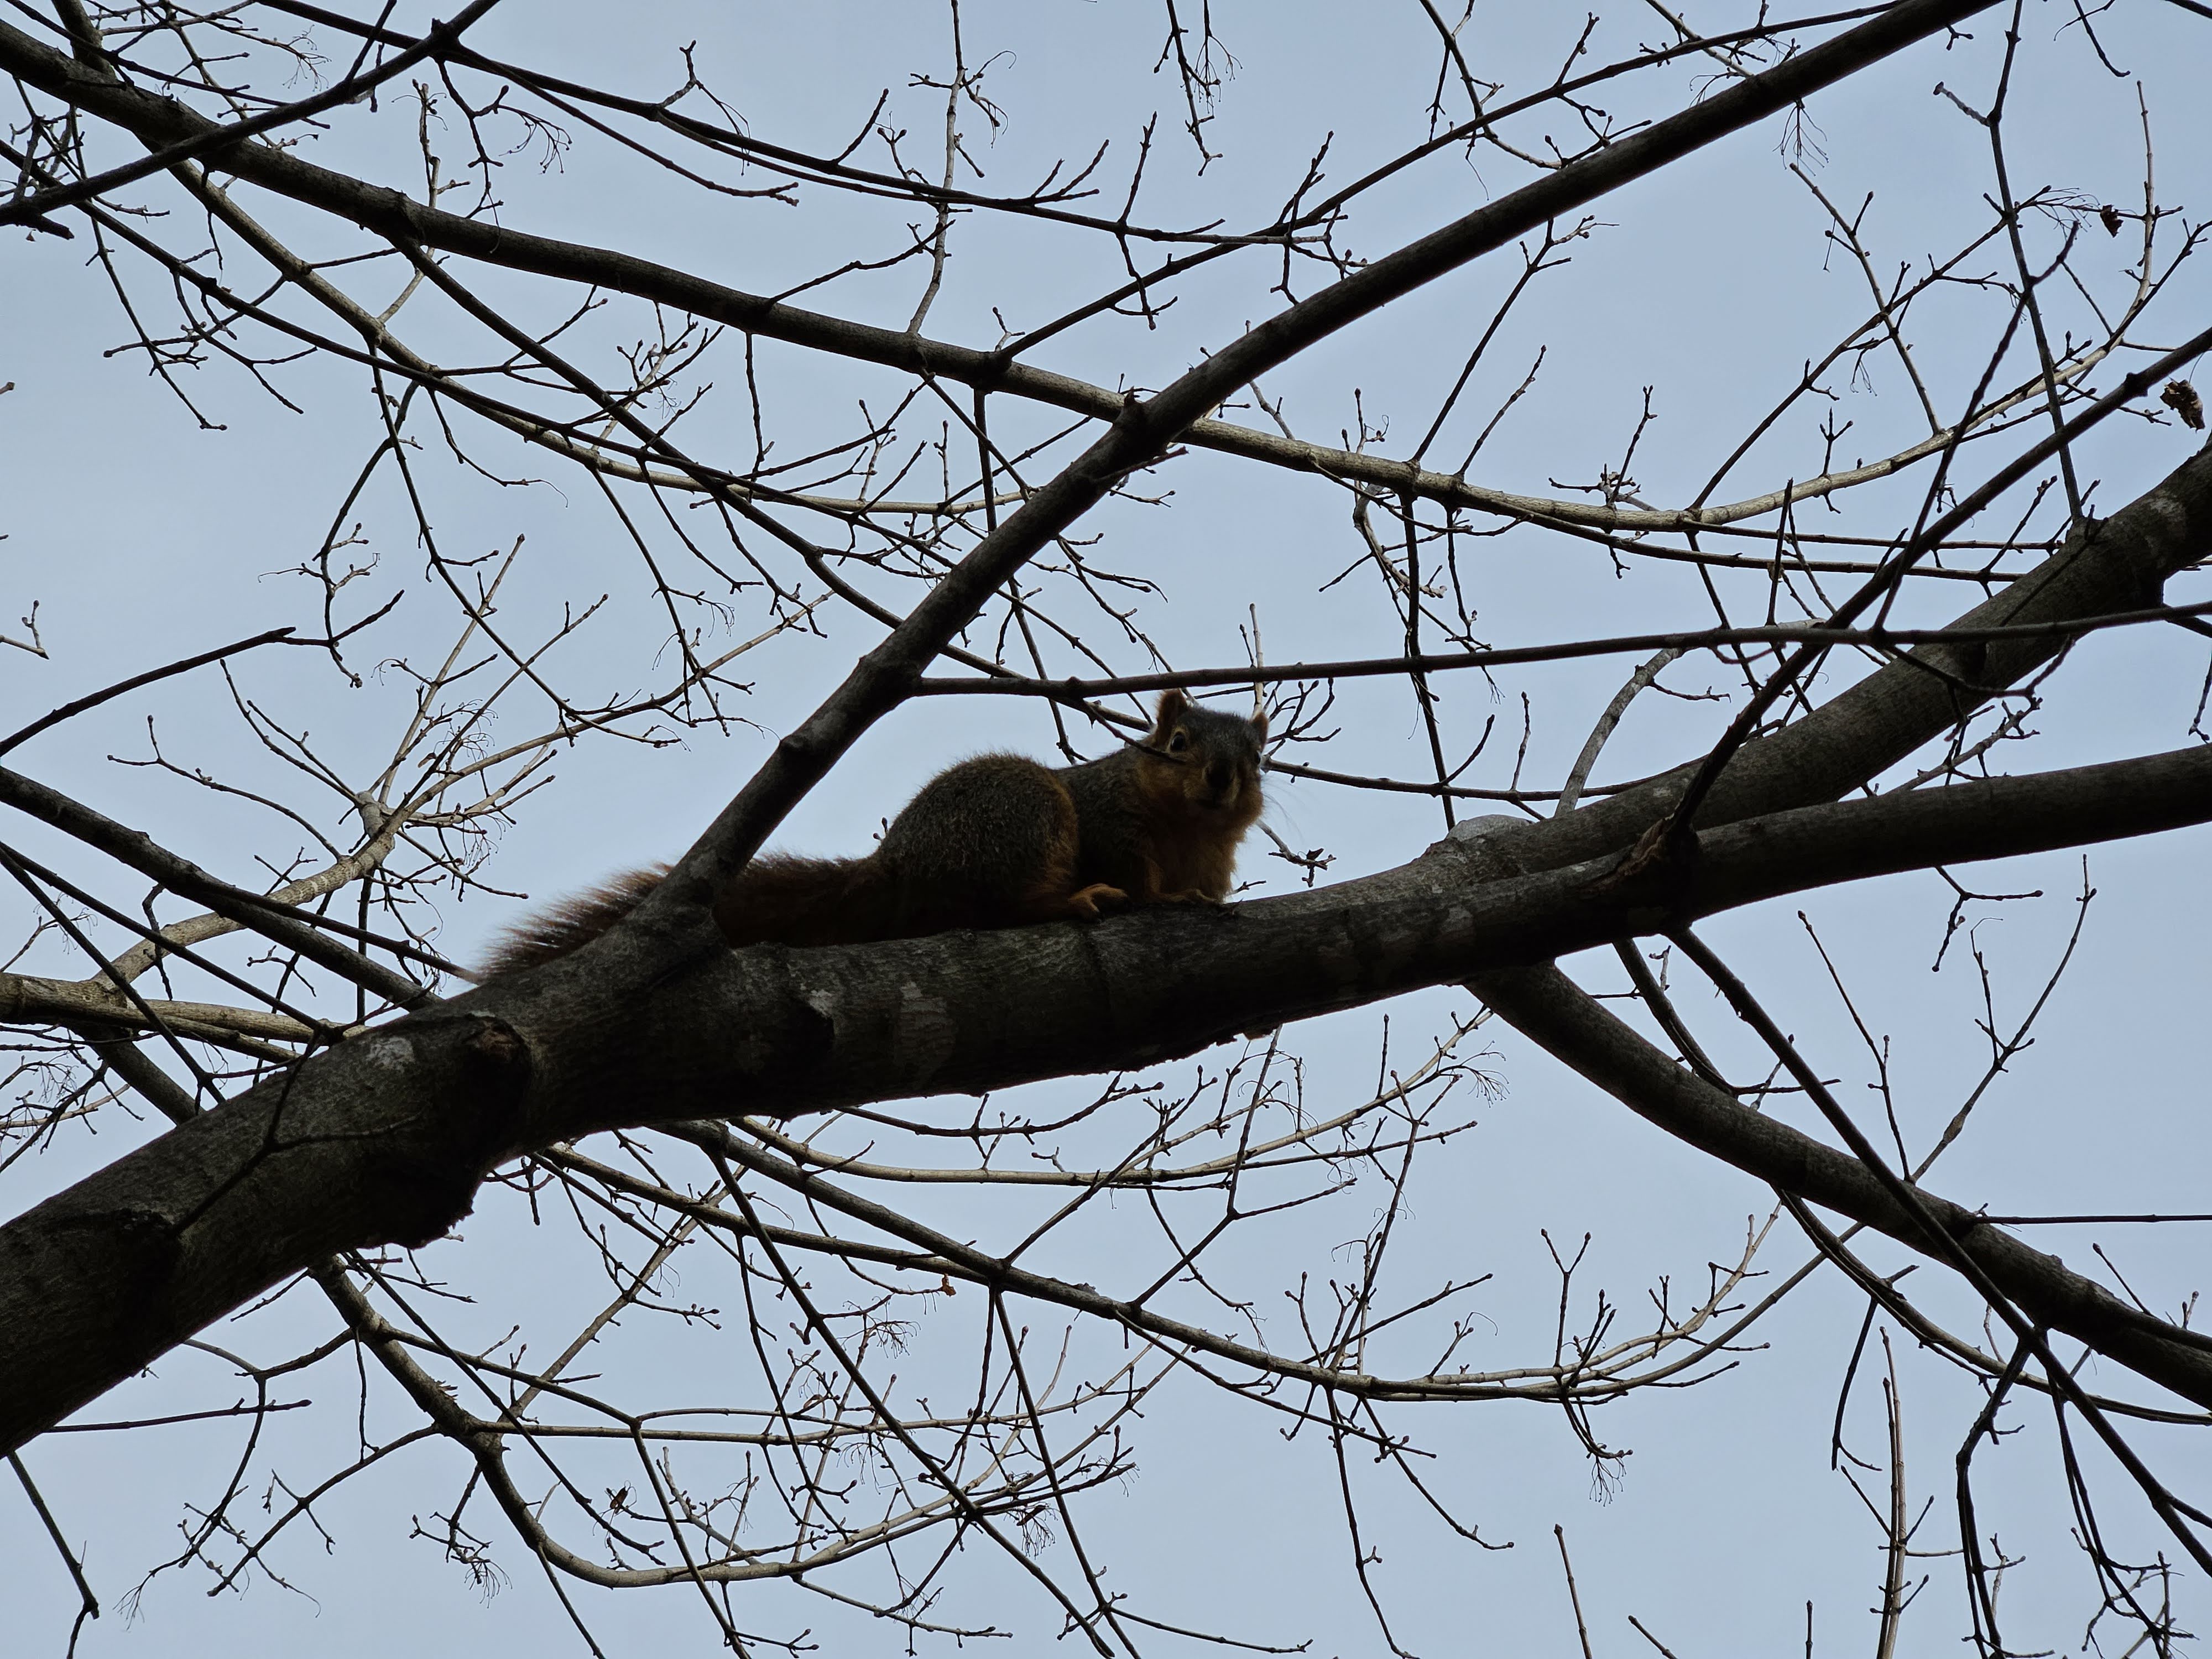 Samsung Galaxy S23 Plus photo of a squirrel in a tree.